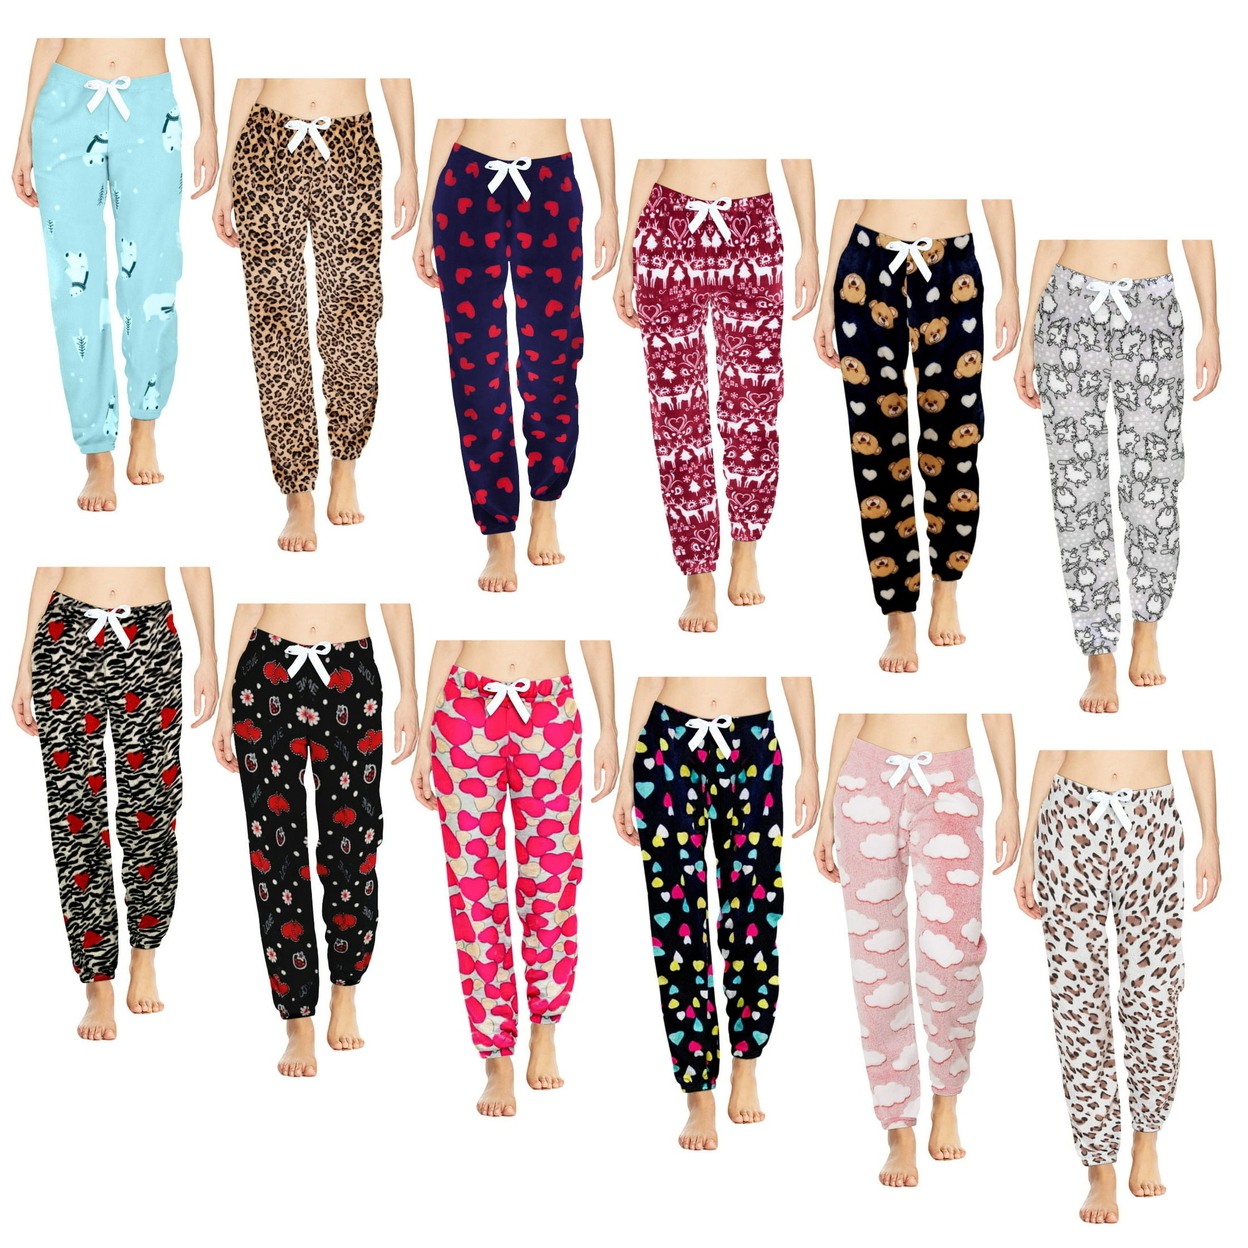 Multi-Pack: Women's Printed Ultra-Soft Comfy Stretch Micro-Fleece Pajama Lounge Pants - 1-pack, Animal, Large